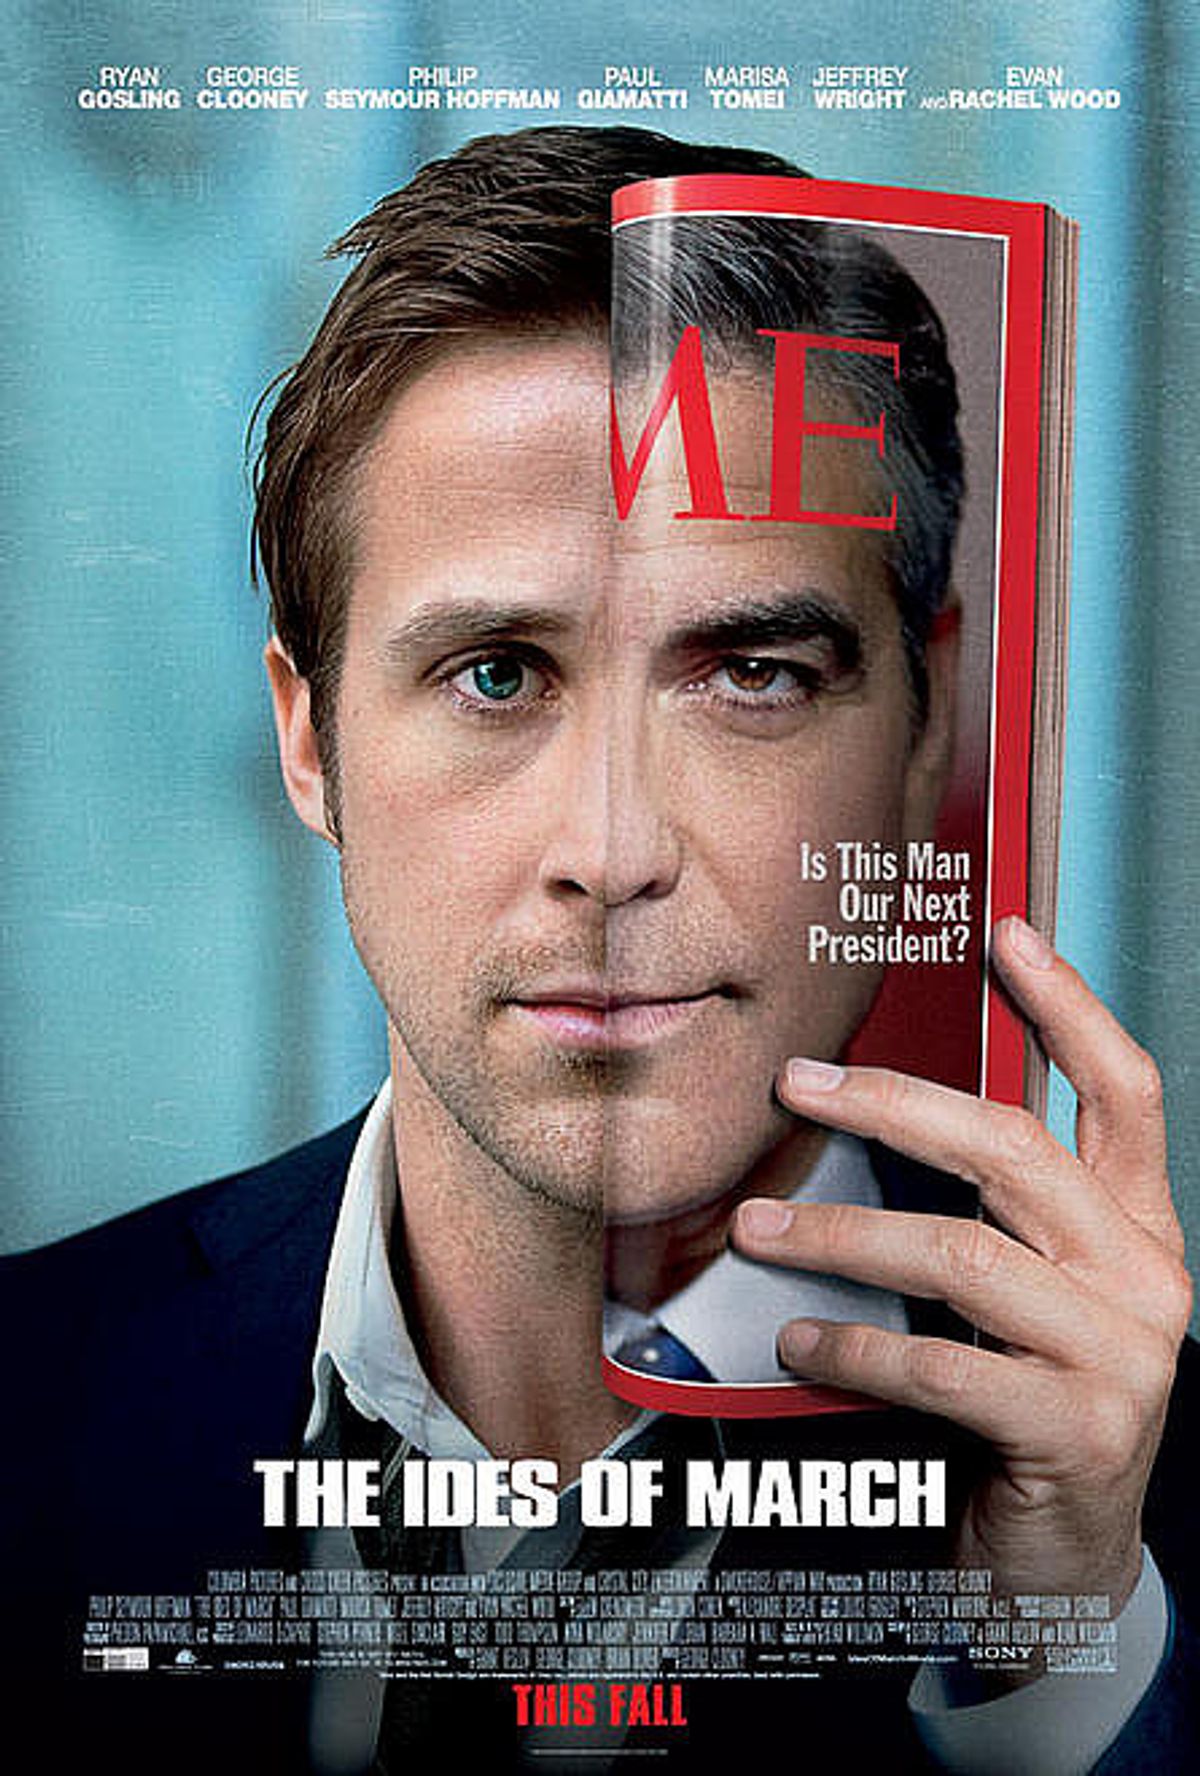 Ryan Gosling and George Clooney on the poster for "The Ides of March."